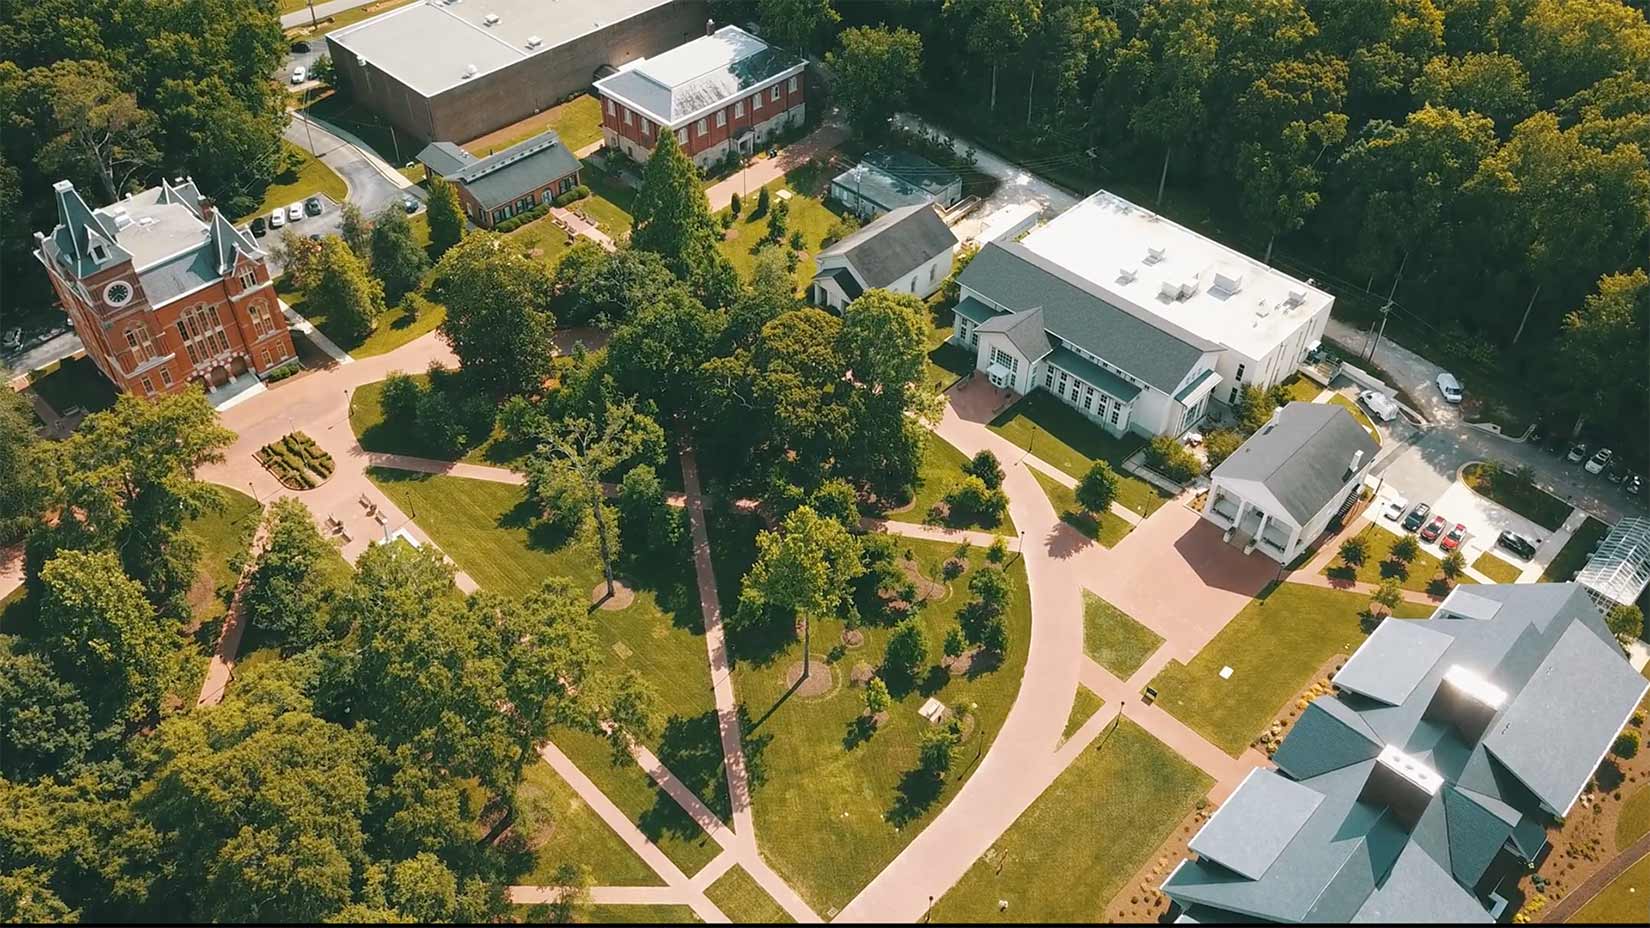 An aerial view of the Oxford campus.